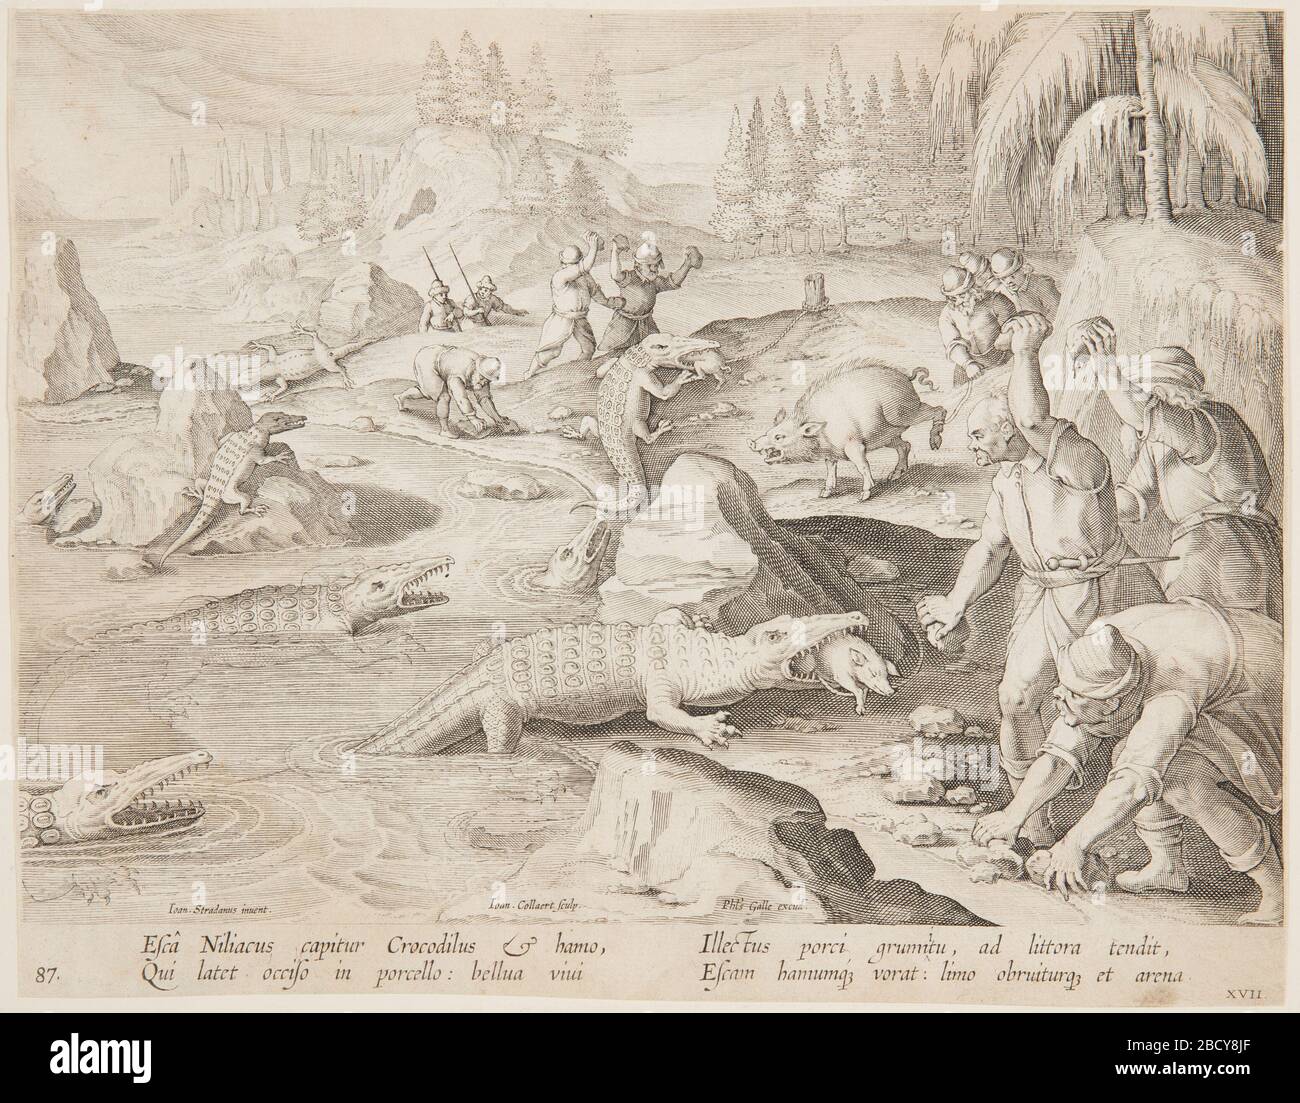 Crocodile hunt. Research in ProgressHorizontal rectangle. Crocodiles are baited by pigs, caught in the act of devouring the small animals tied up close to the edge of the beach. The crocodiles, unable to retreat easily, are stoned by men, waiting for them on the beach. At lower left: 'Ioan. Crocodile hunt Stock Photo